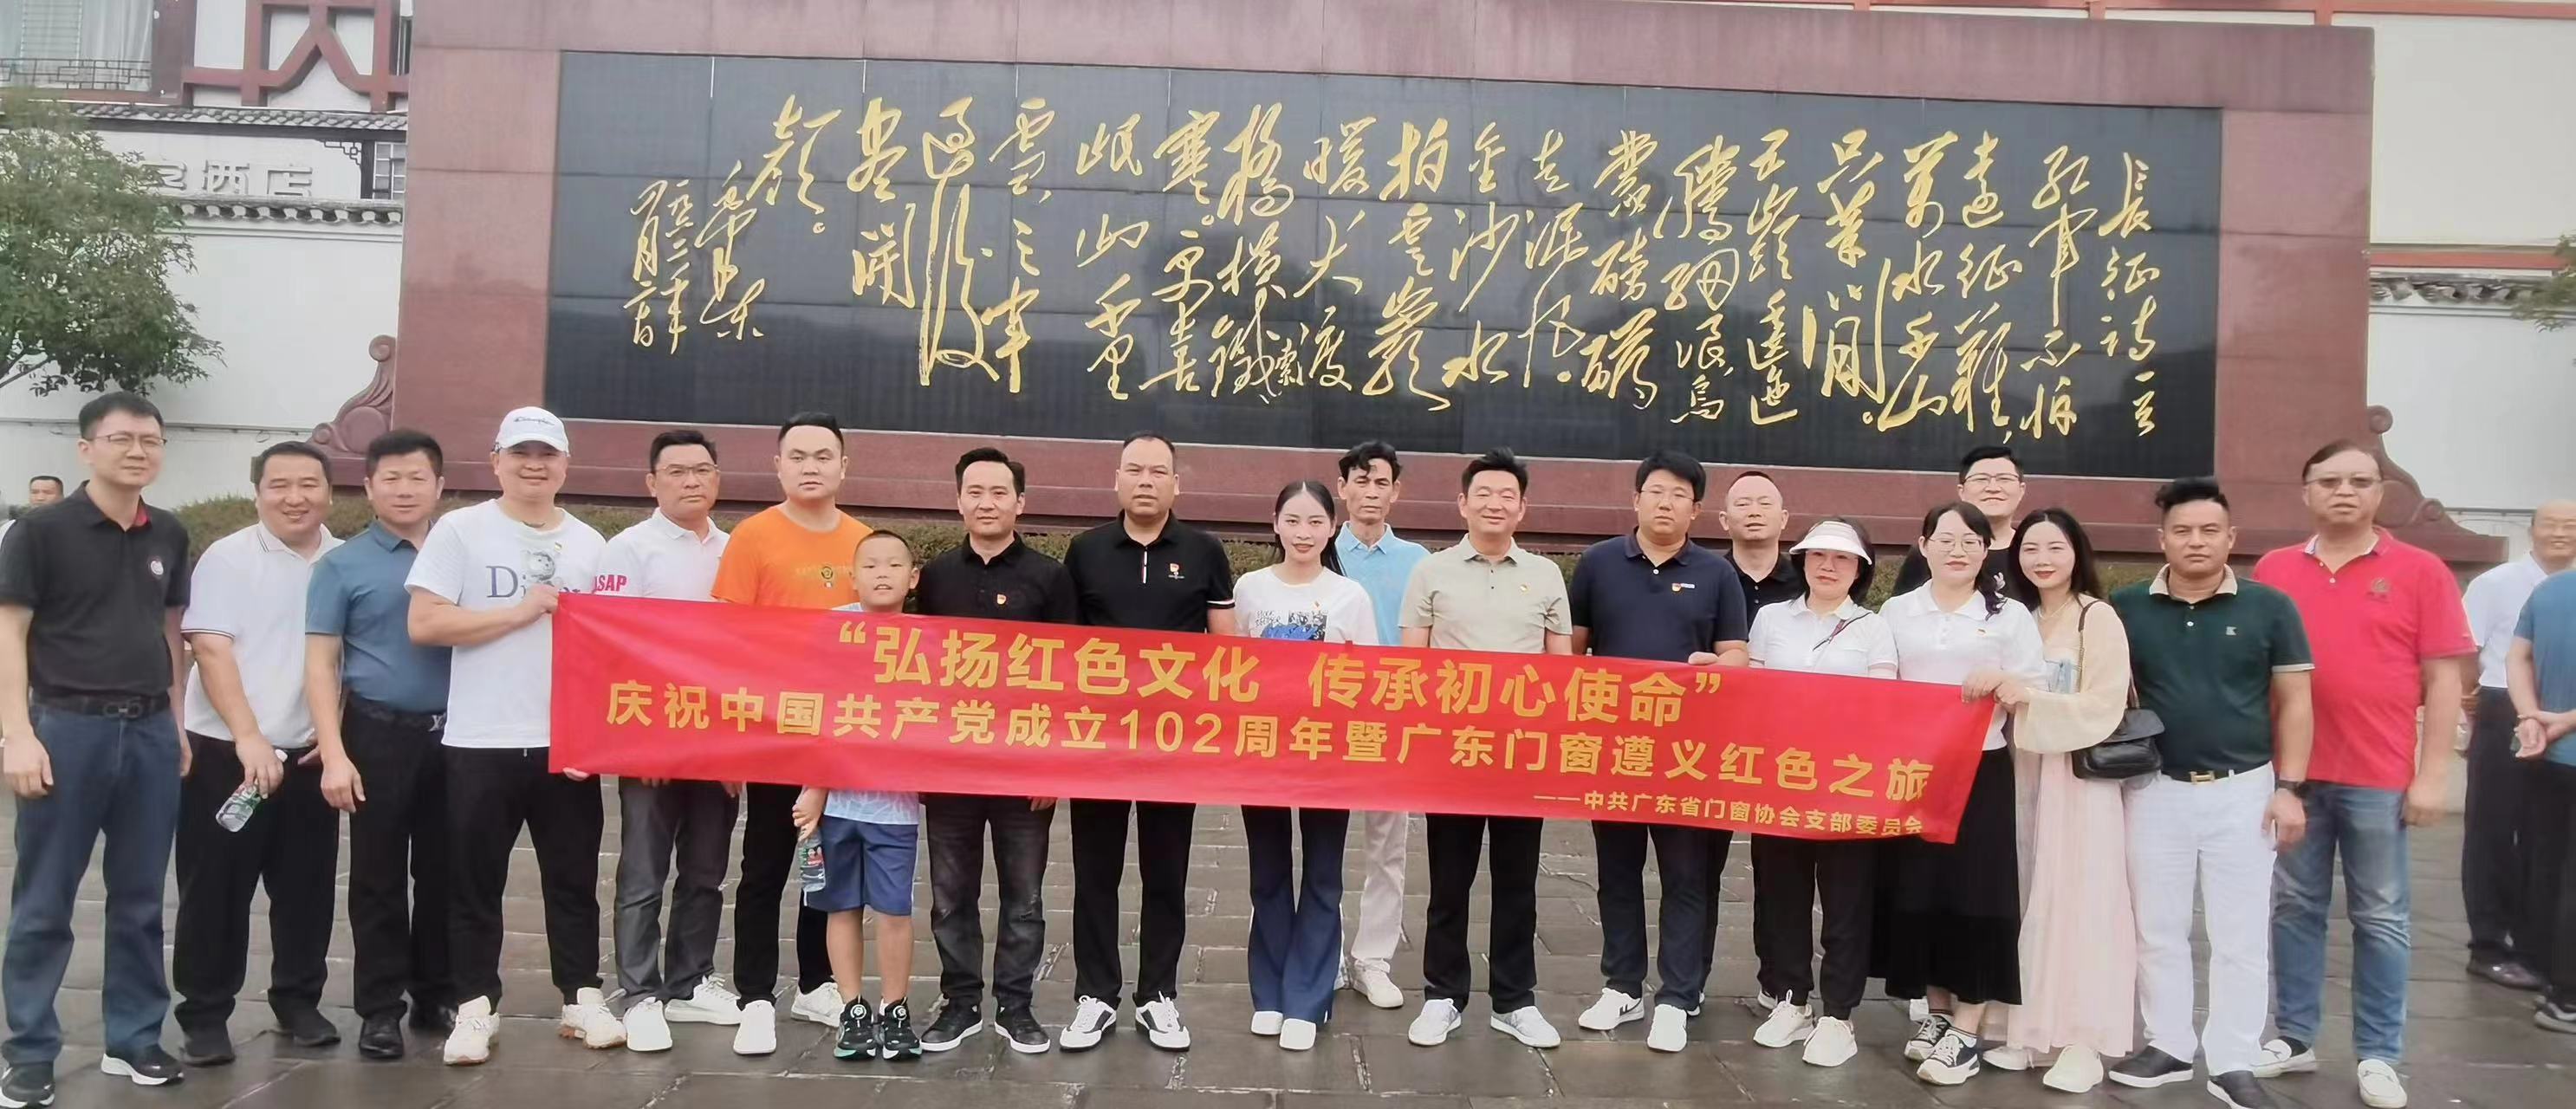  The branch committee of the Guangdong Doors and Windows Association of the Communist Party of China carried out the activity of "Celebrating the 102nd anniversary of the founding of the Party and the Red Tour of Guangdong Doors and Windows in Zunyi"